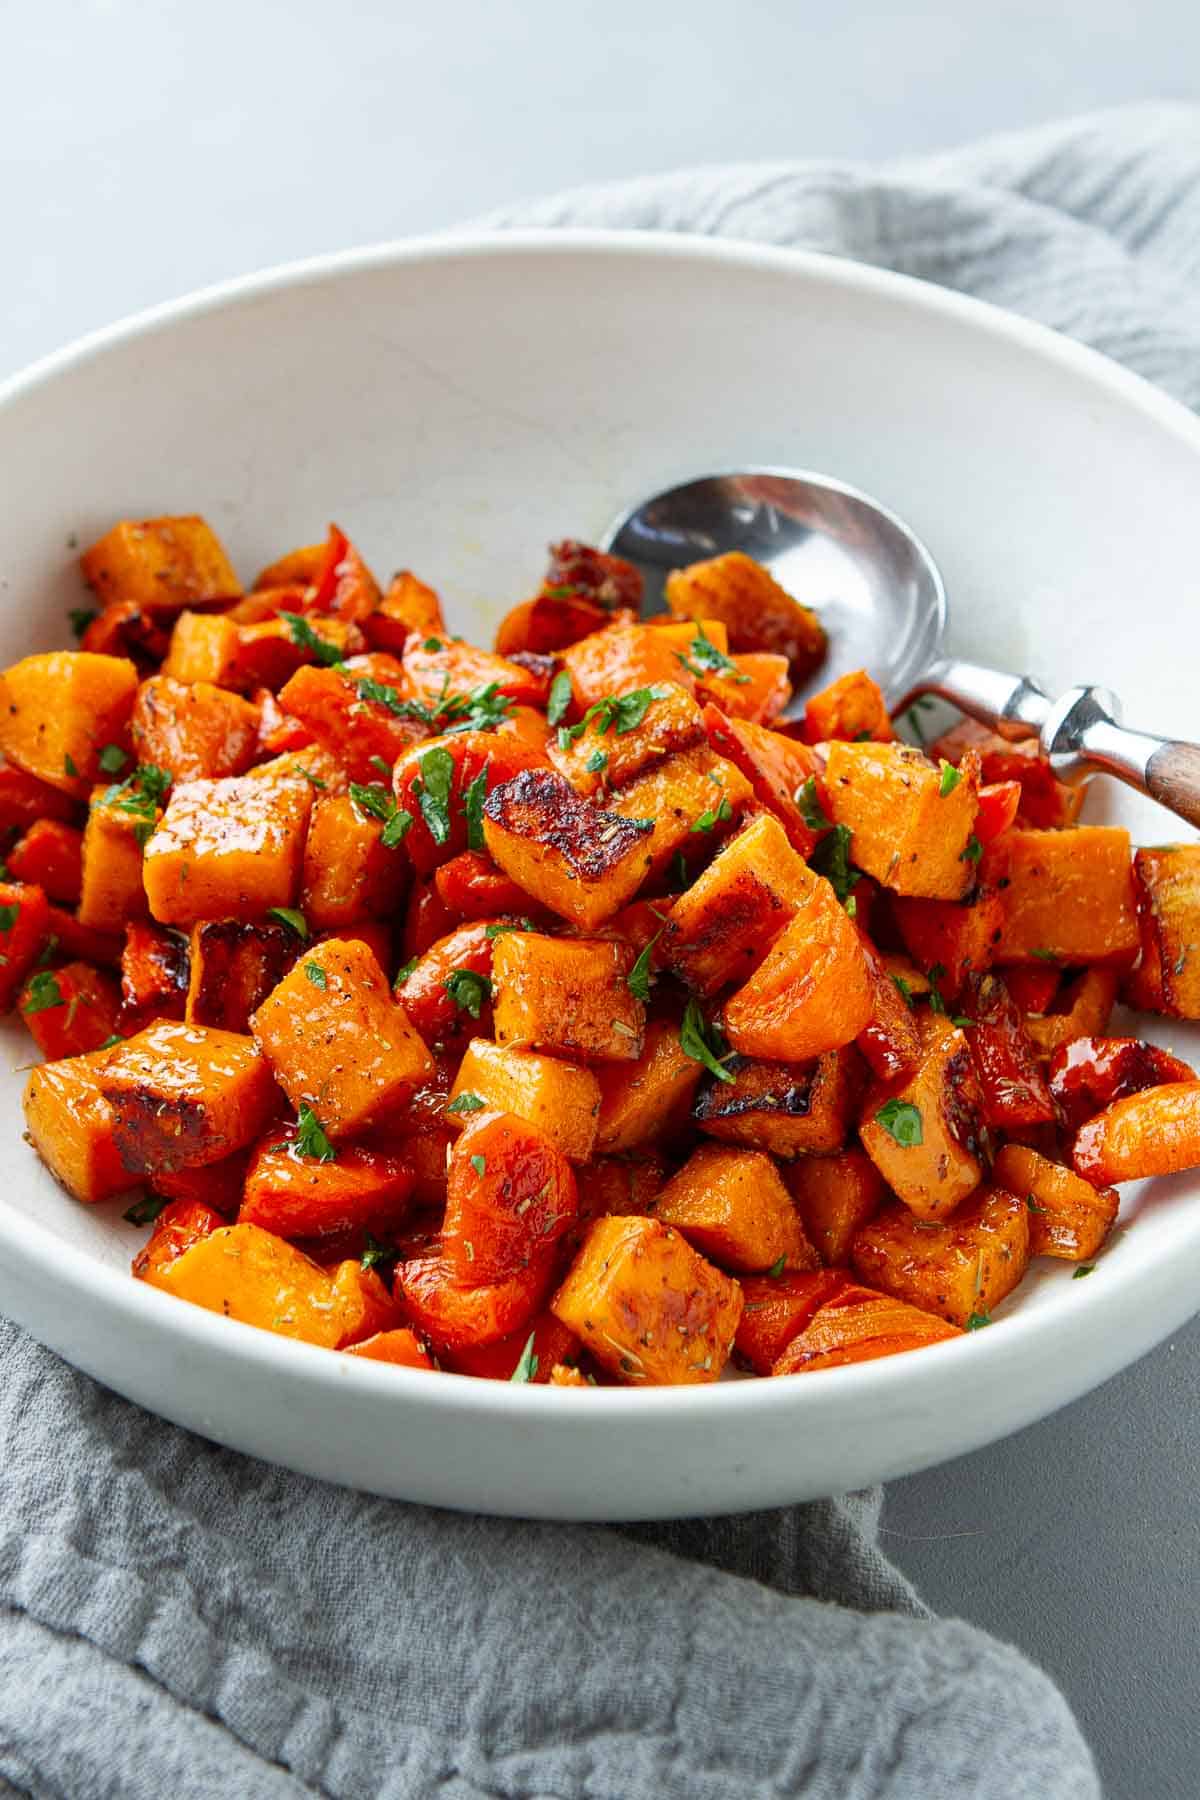 Roasted sweet potatoes and carrots in a white bowl.